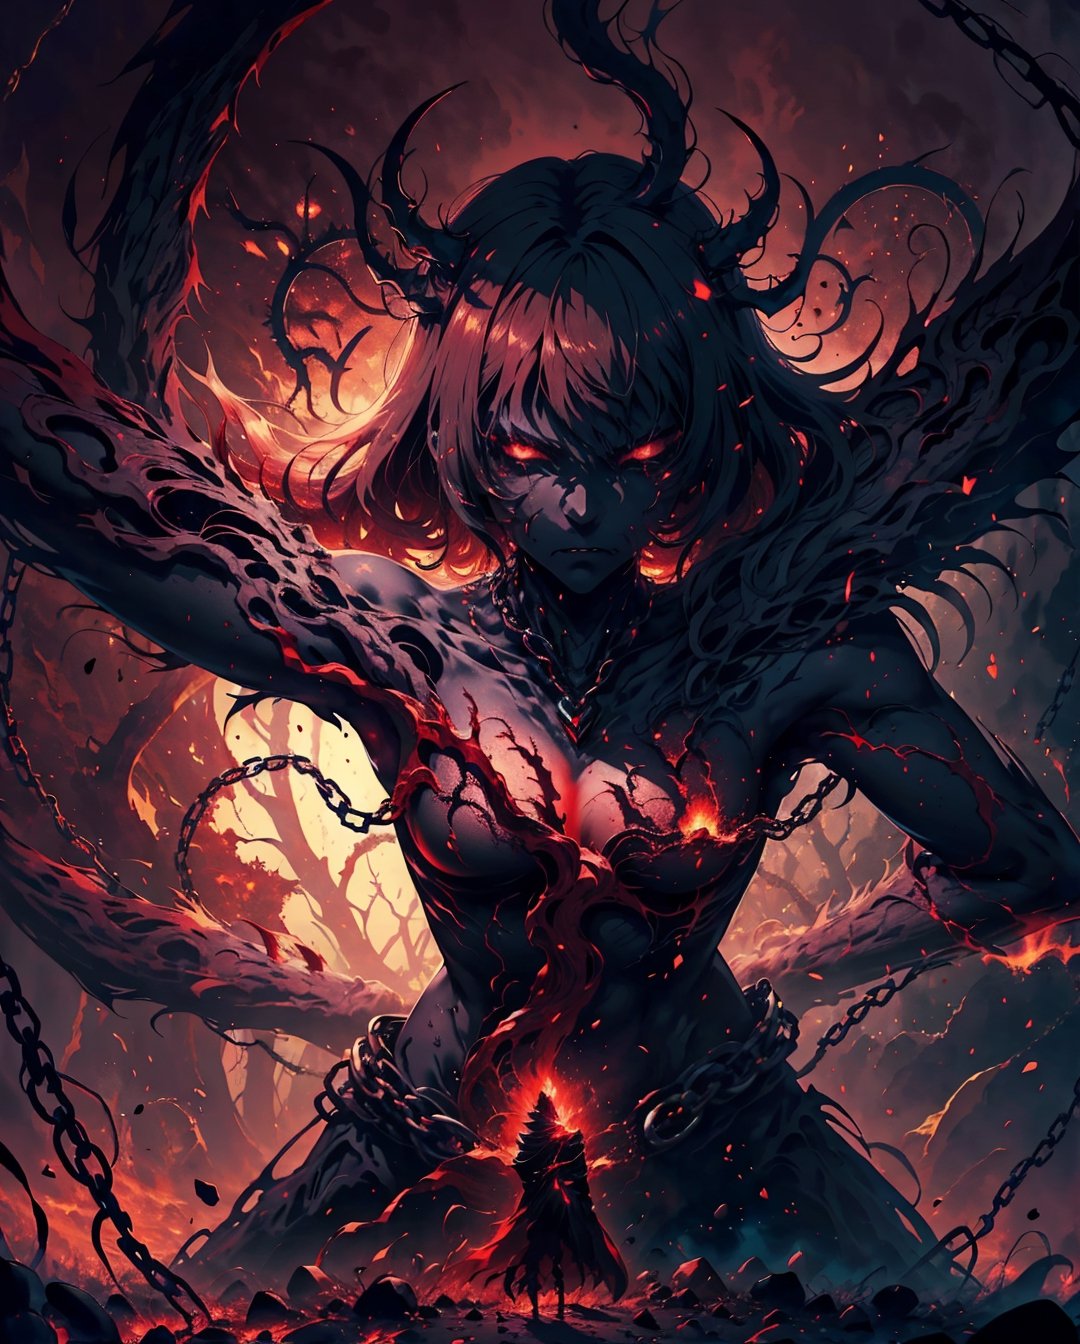 (Anime-style:1.3), (Dark and intense:1.2), A striking anime character, shrouded in shadows and poised for battle, stands against a deep crimson background adorned with menacing chains. Glowing red hollow fire particles dance around the scene, creating an otherworldly ambiance. The unique pastel look adds an ethereal touch to this dramatic and visually intense composition.,fantasy00d